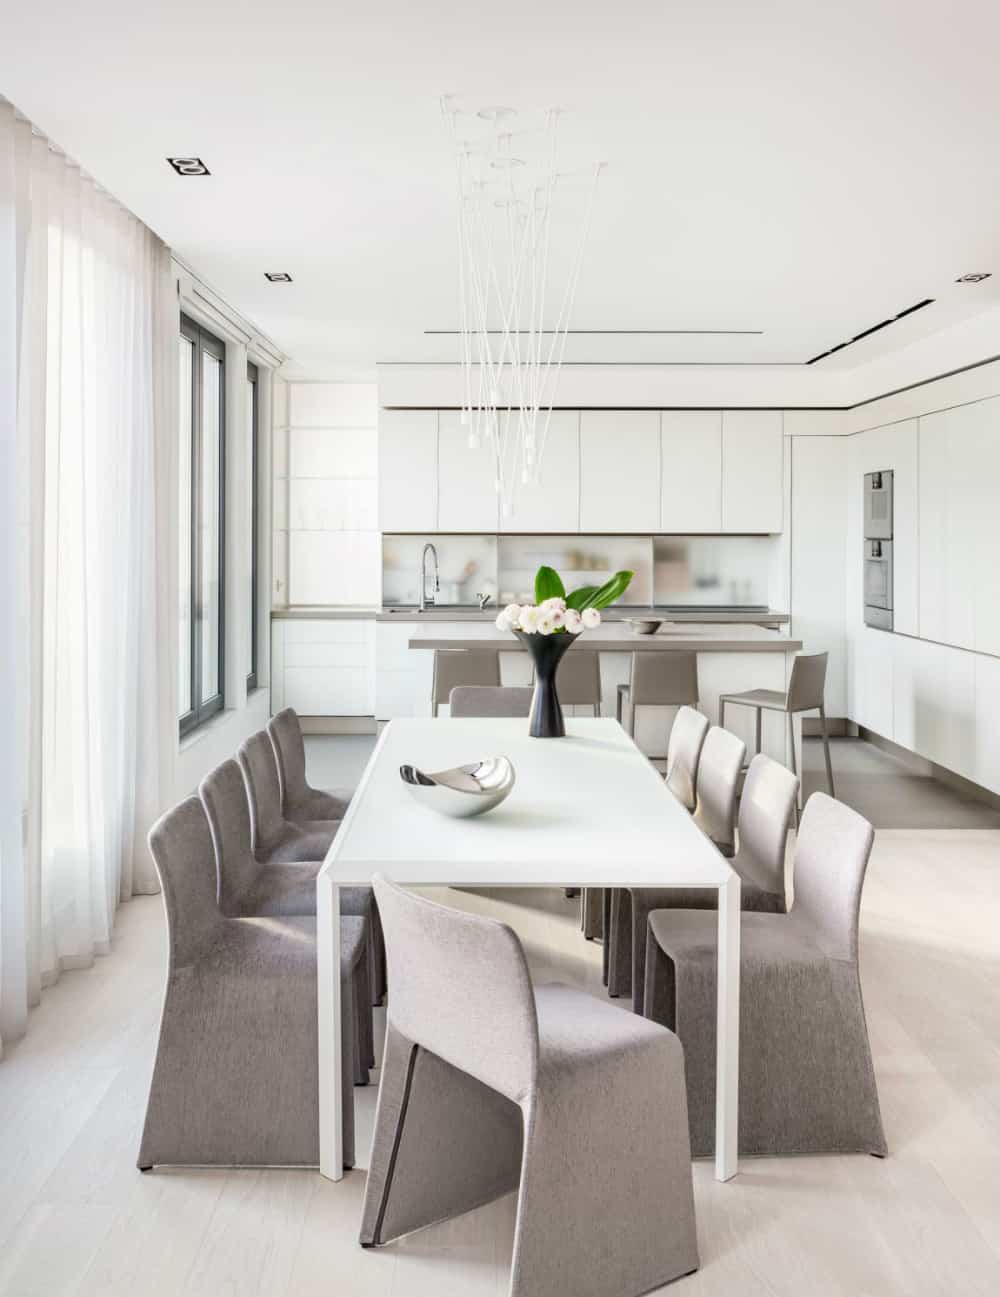 Open dining area is sophisticated but inviting